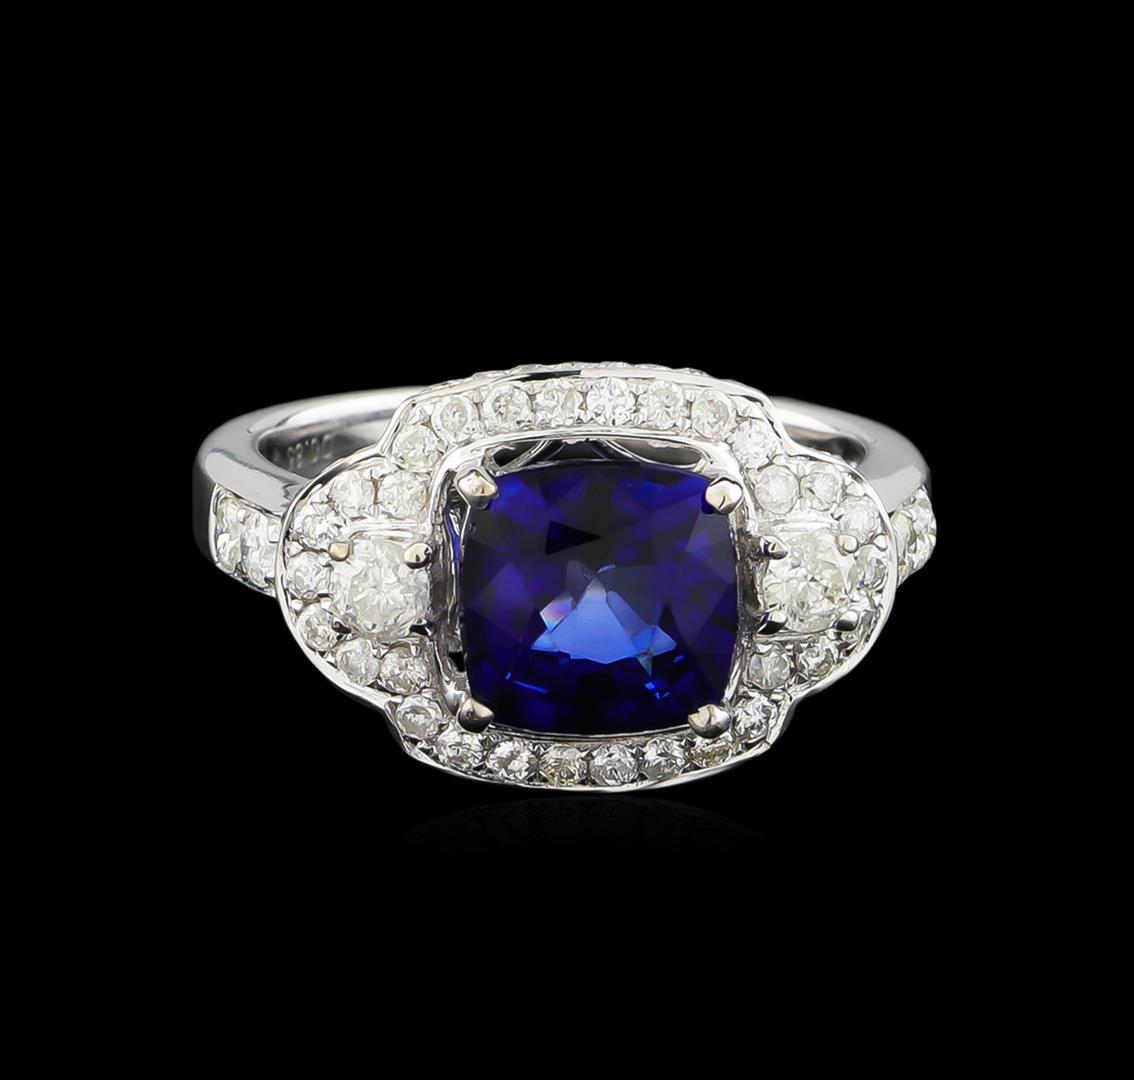 14KT White Gold 2.58 ctw Sapphire and Diamond Ring